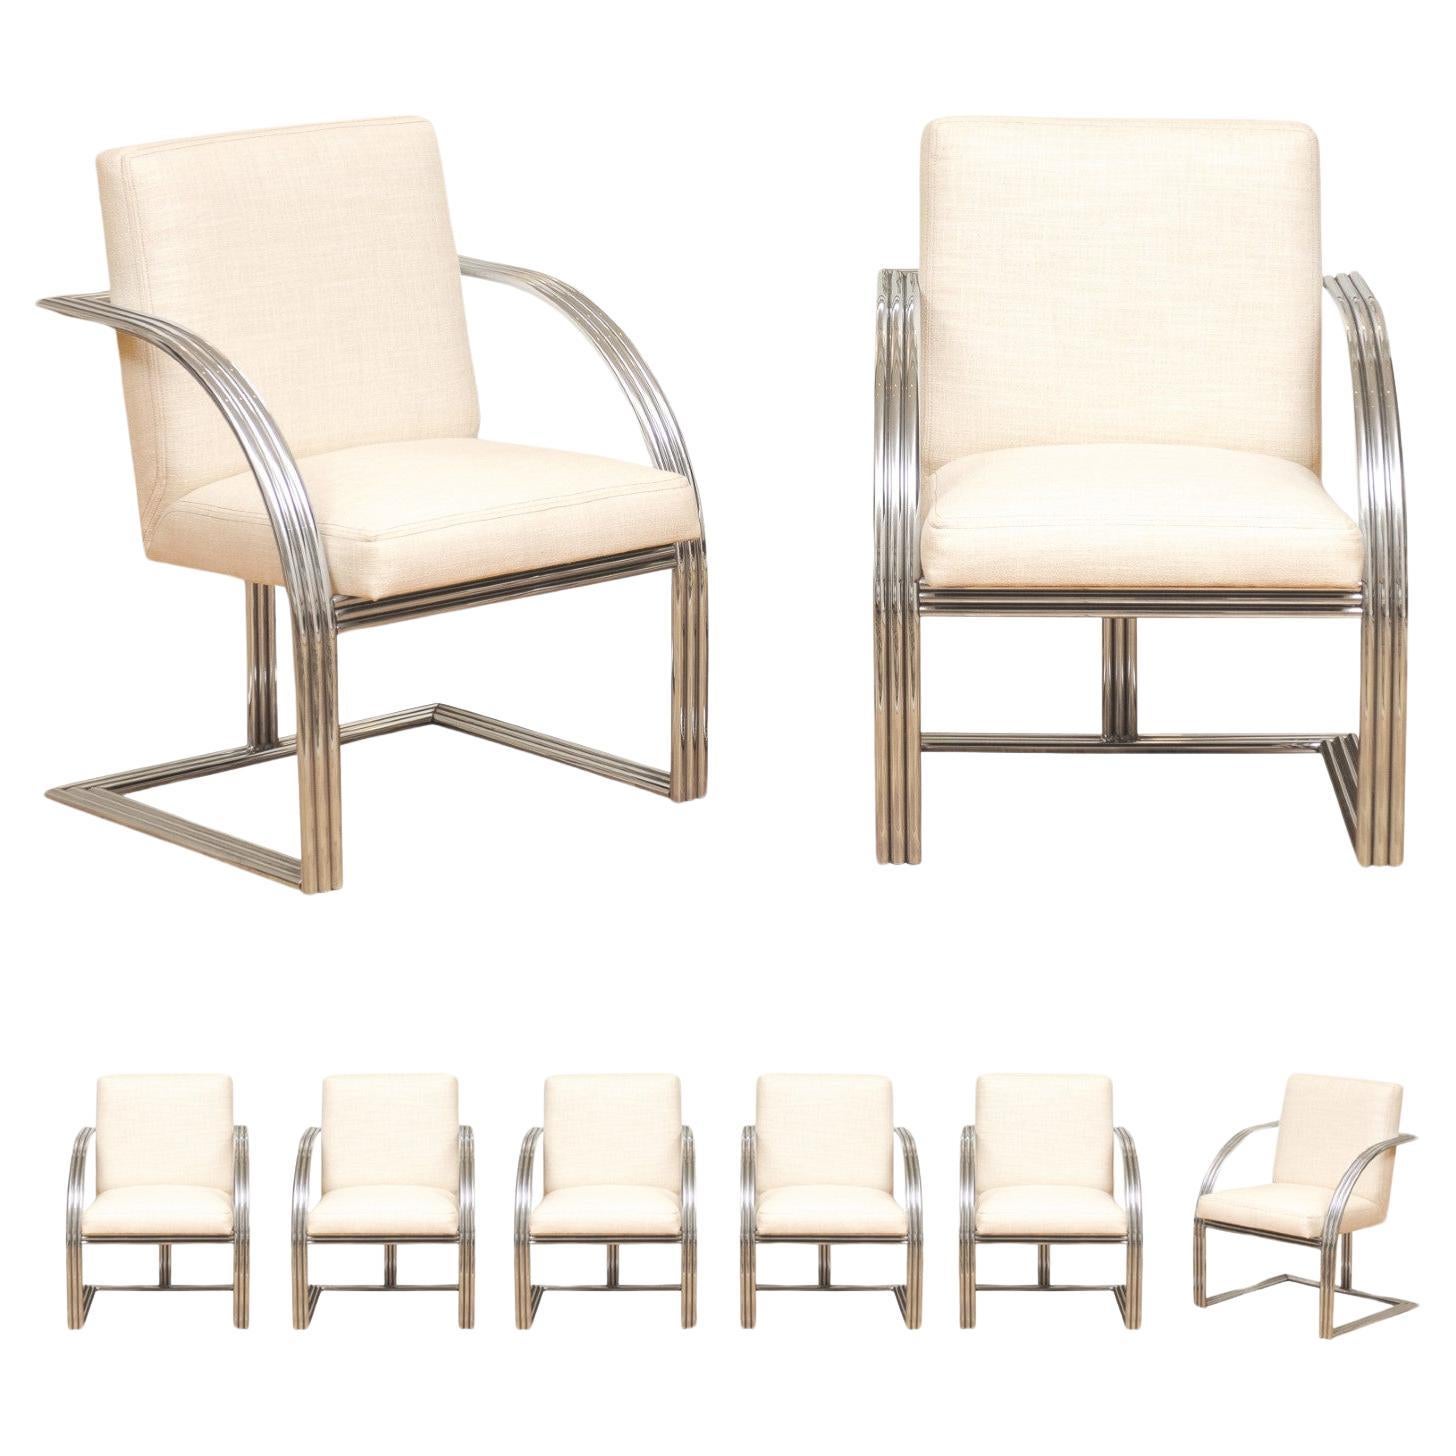 Exquisite Set of 8 Vintage Steel Art Deco Revival Dining Chairs by Milo Baughman For Sale